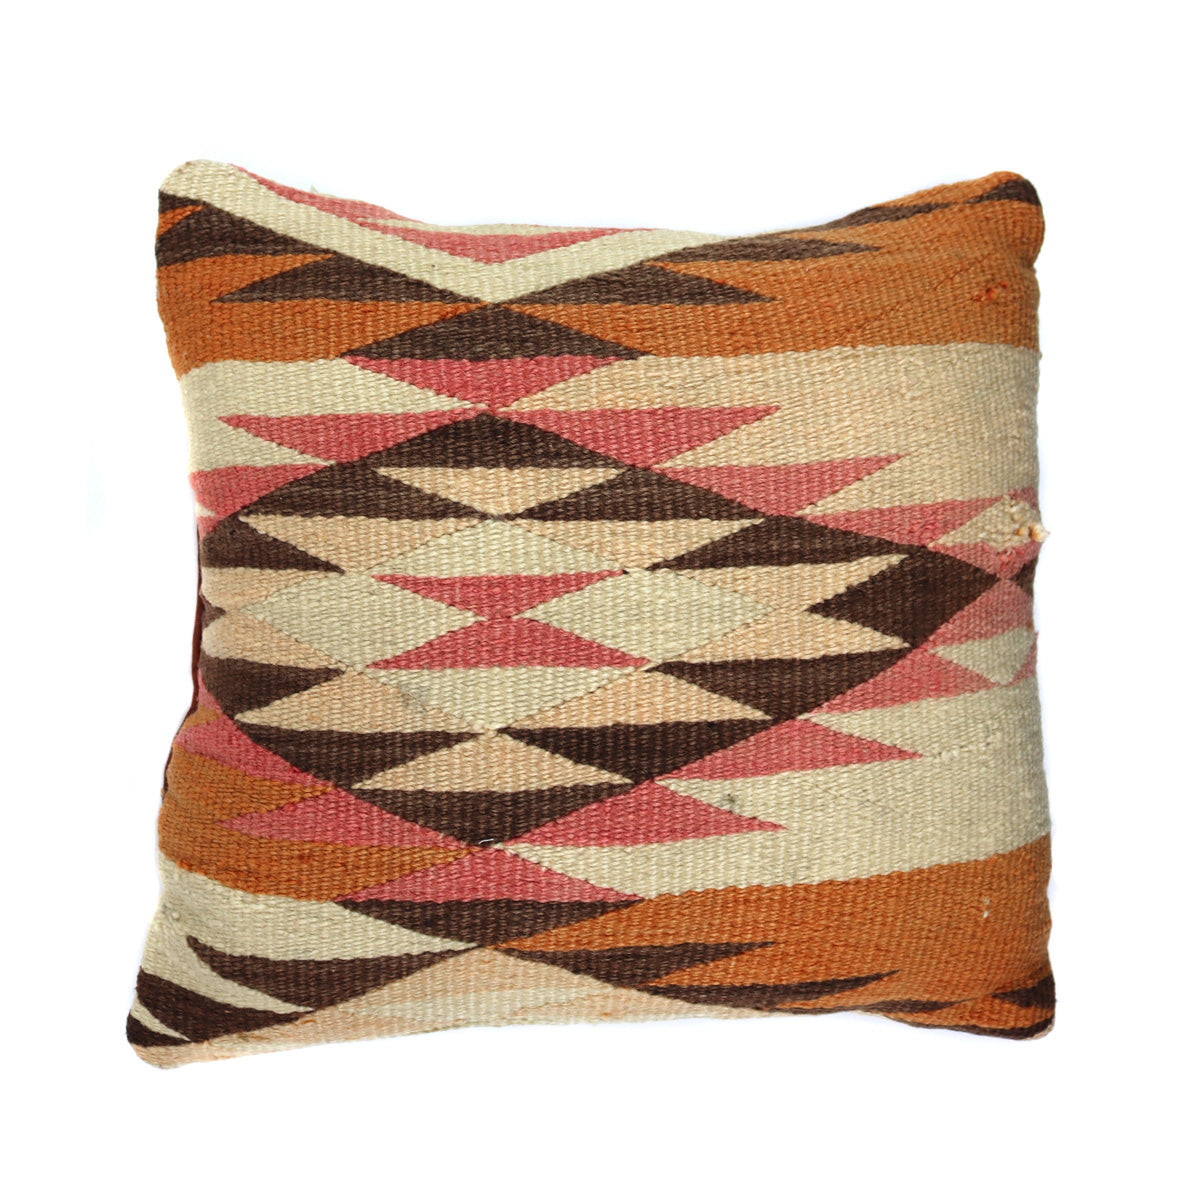 Custom Leather Pillow with c. 1920s Navajo Red Mesa Textile Inlay, 14" x 15" x 5" (F91910D-0722-008)